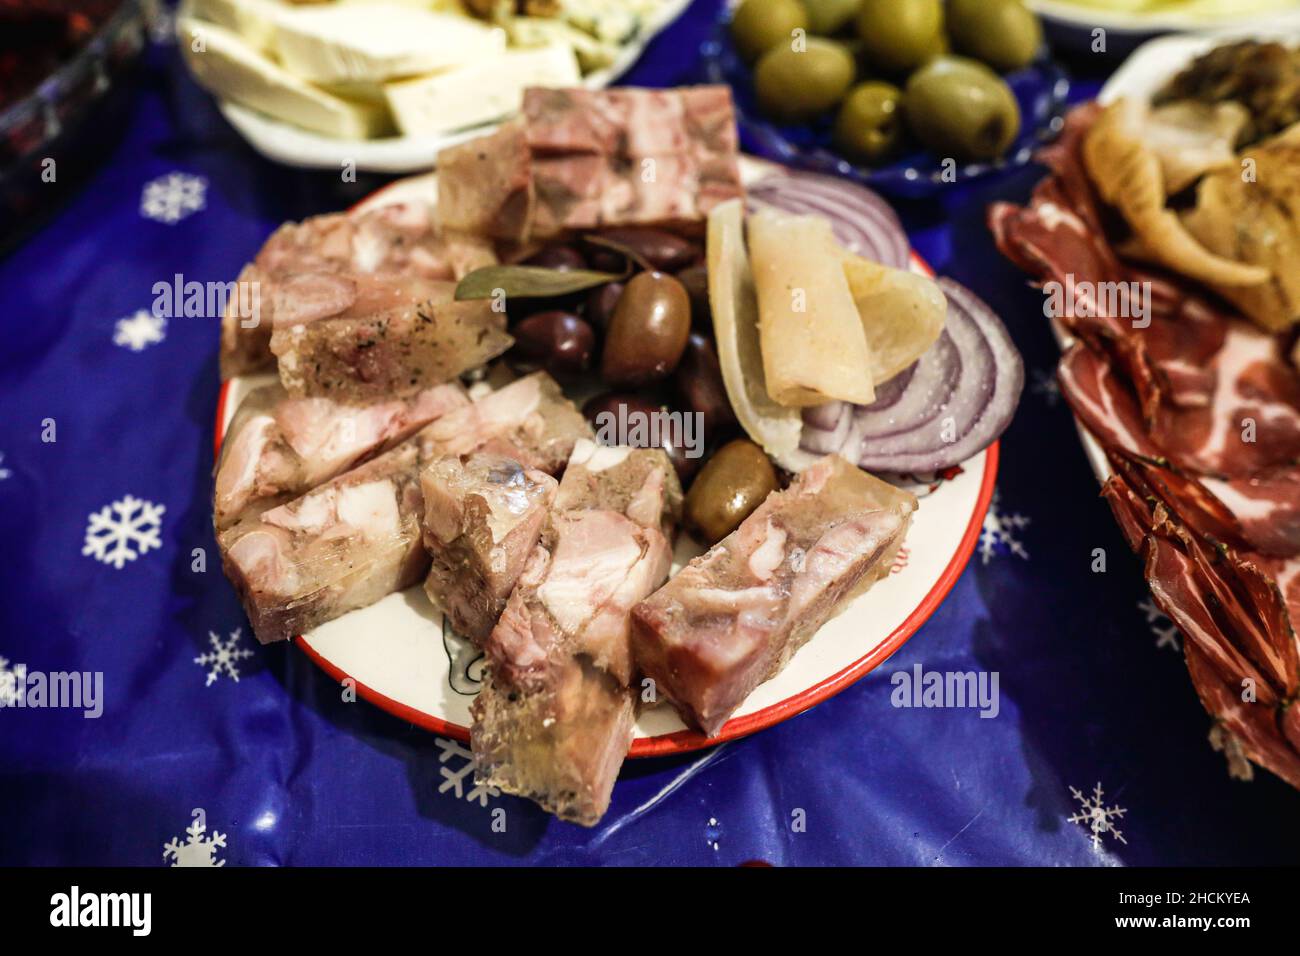 Shallow depth of field (selective focus) details with Romanian traditional winter holidays pork meat products. Stock Photo